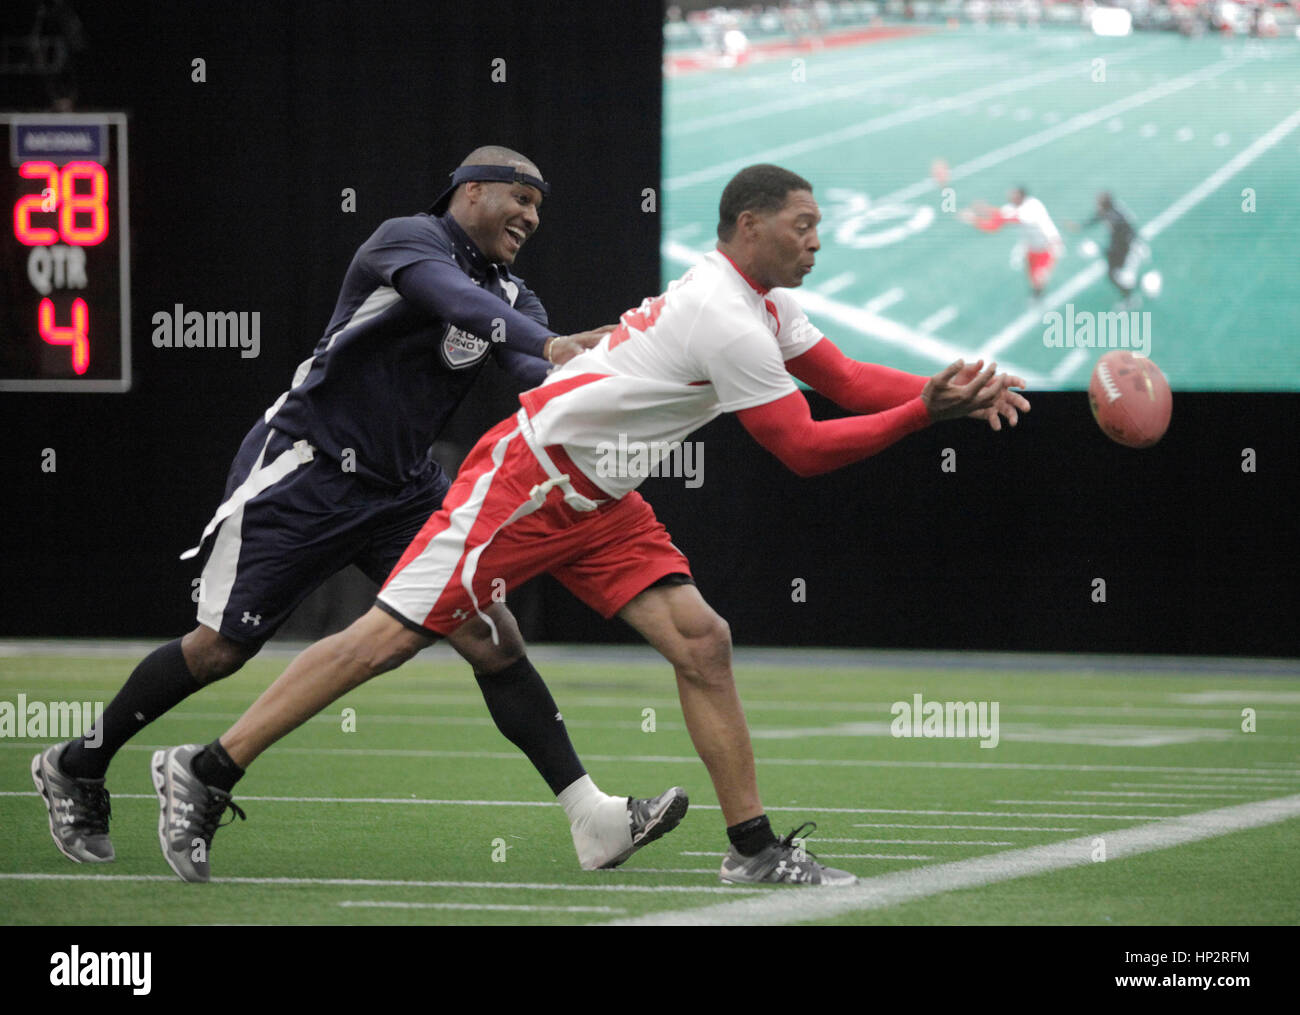 Marcus Allen, right, tries to catch a pass while defended by Derrick Brooks, at the Tazon Latino V flag football game at Super Bowl NFL Experience at the Dallas Convention Center on February 2, 2011 in Dallas, Texas. Photo by Francis Specker Stock Photo